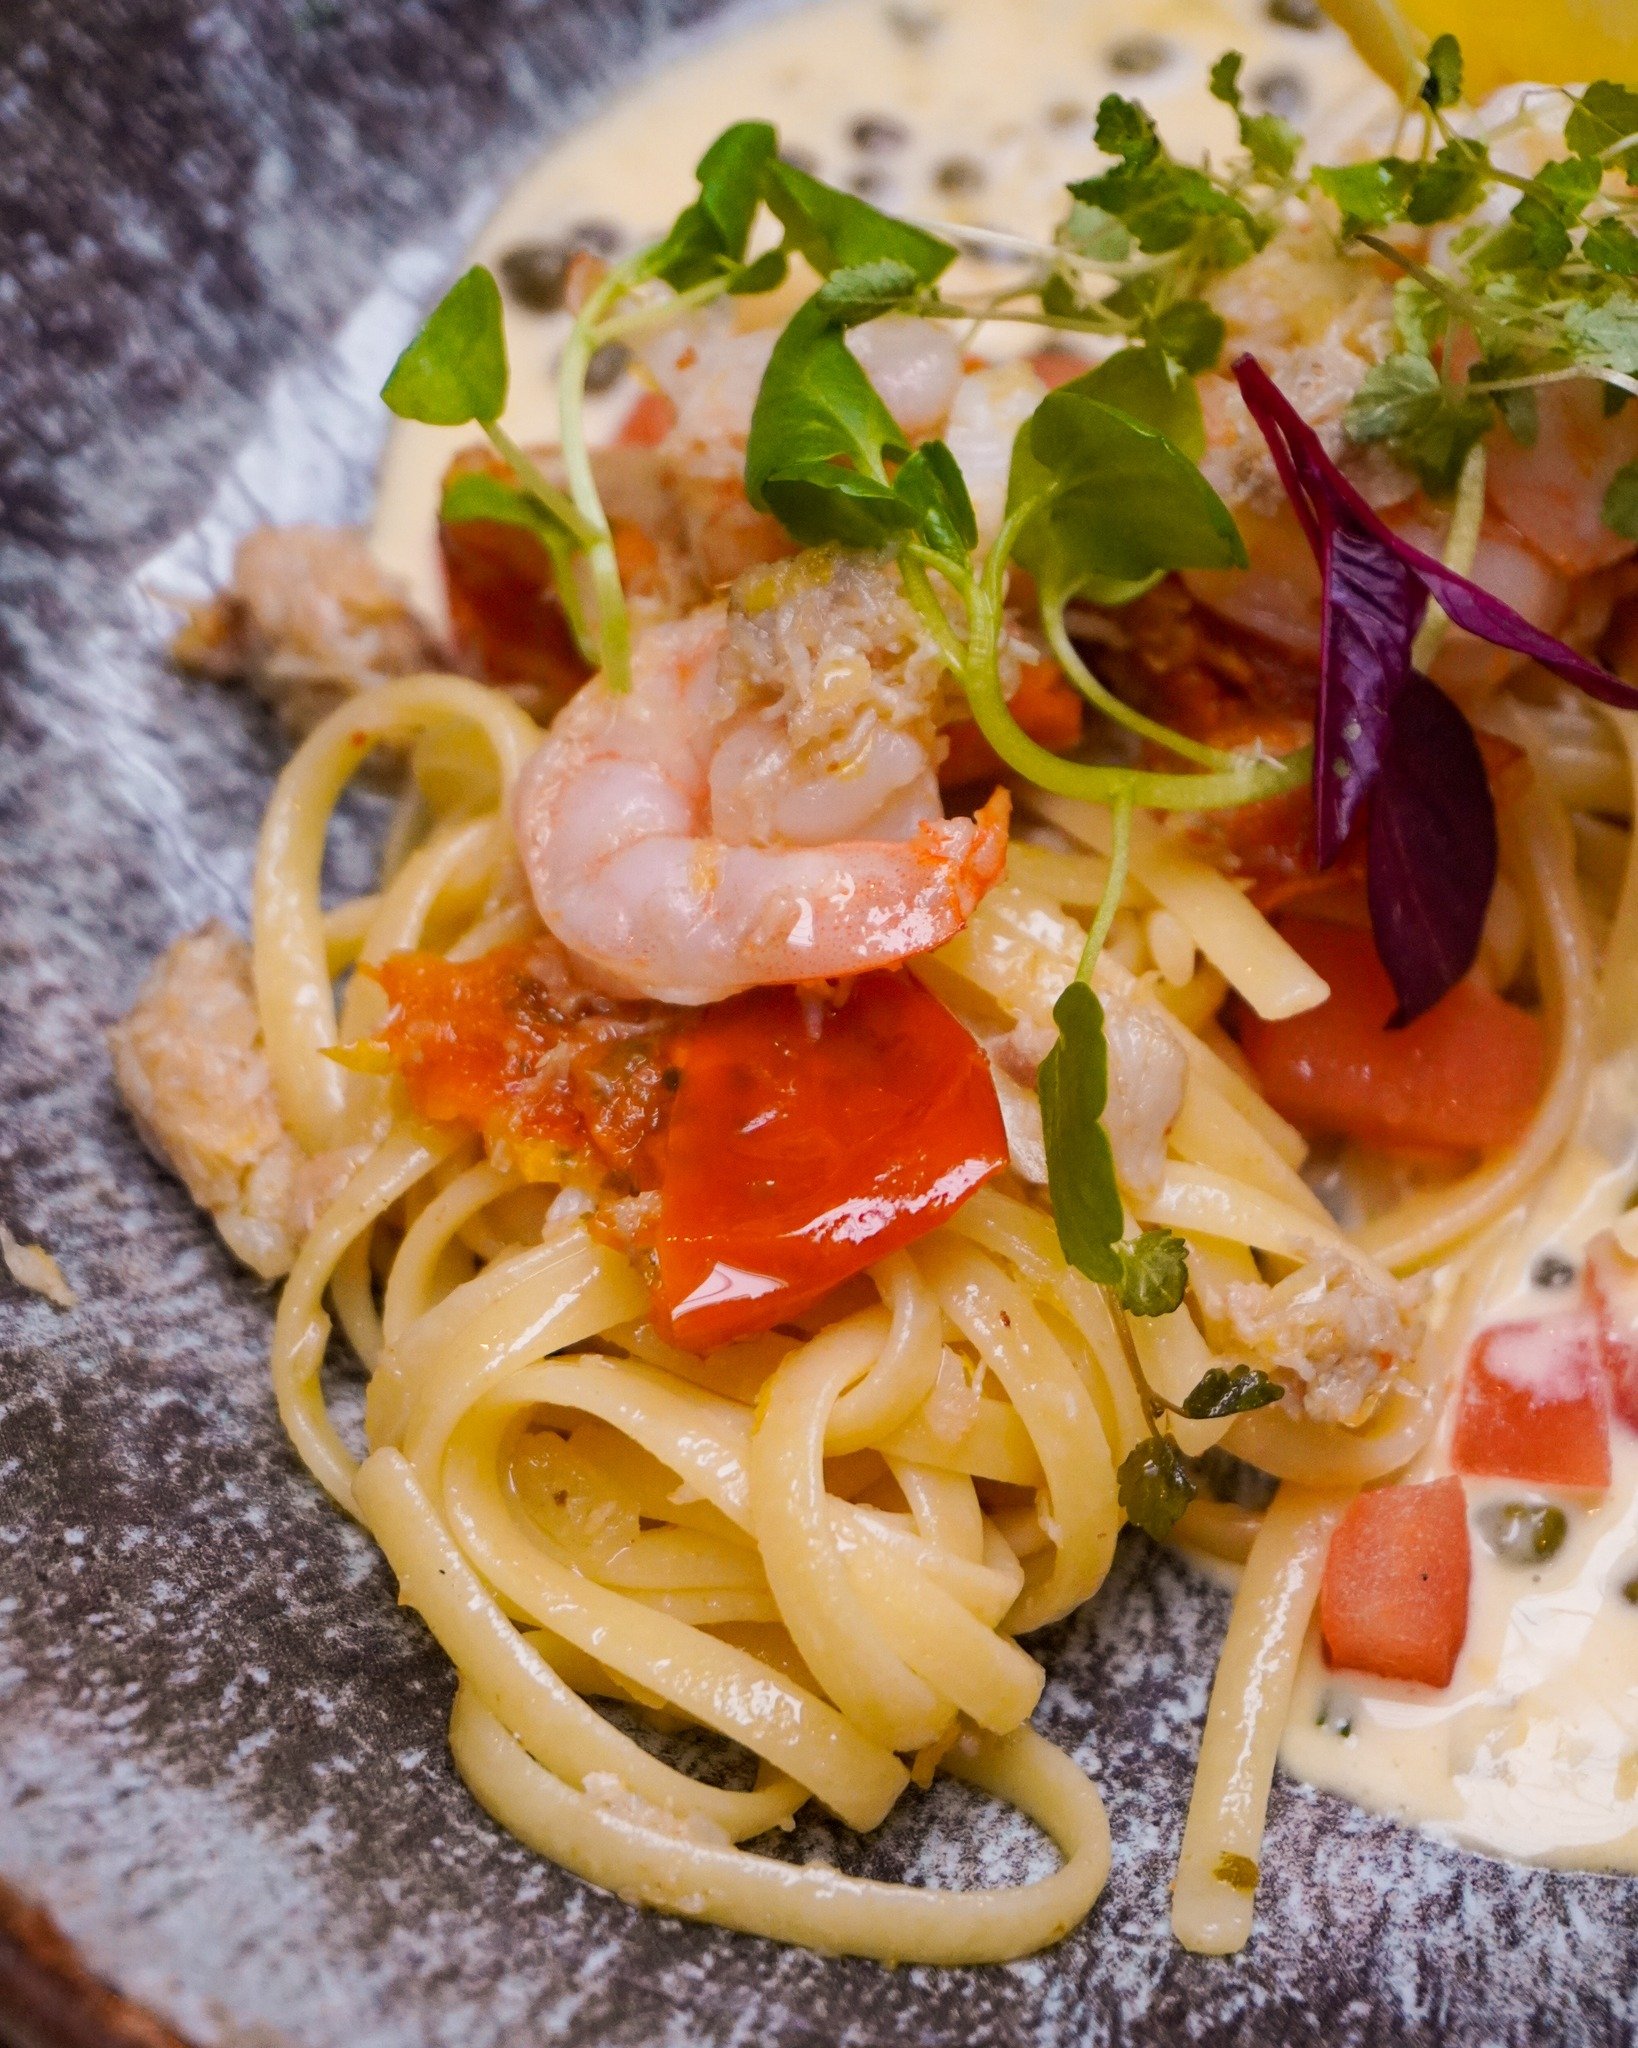 Prawn and crab Linguine from our lunch menu 🍽

Served with Charred lemon, garlic and sun-blushed tomatoes and garlic focaccia, it's a delicious taste of the sea 😋🦀🍅🧄

Available from 12pm.

#tynemouth #tynemouthbars #tynemouthfood #tynemouthresta